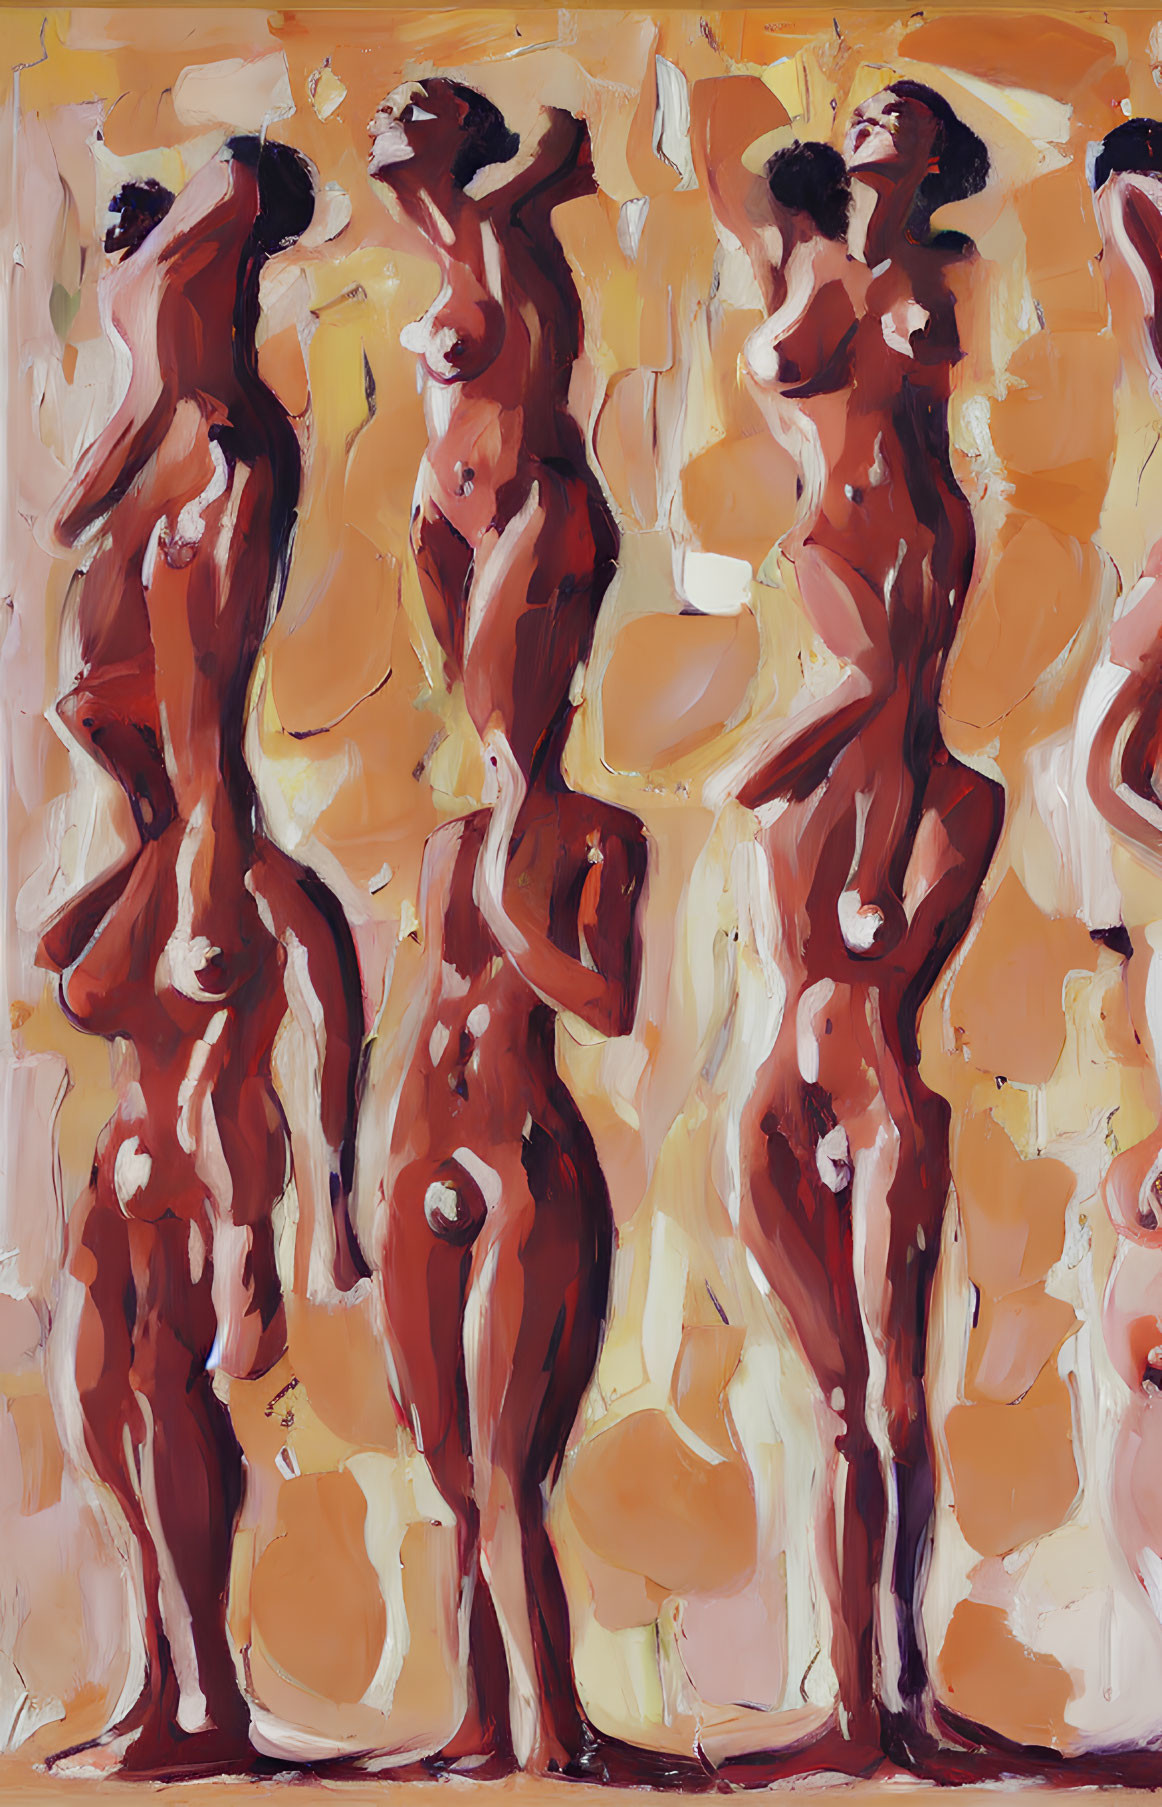 Repetitive Stylized Human Forms in Brown and Beige Palette